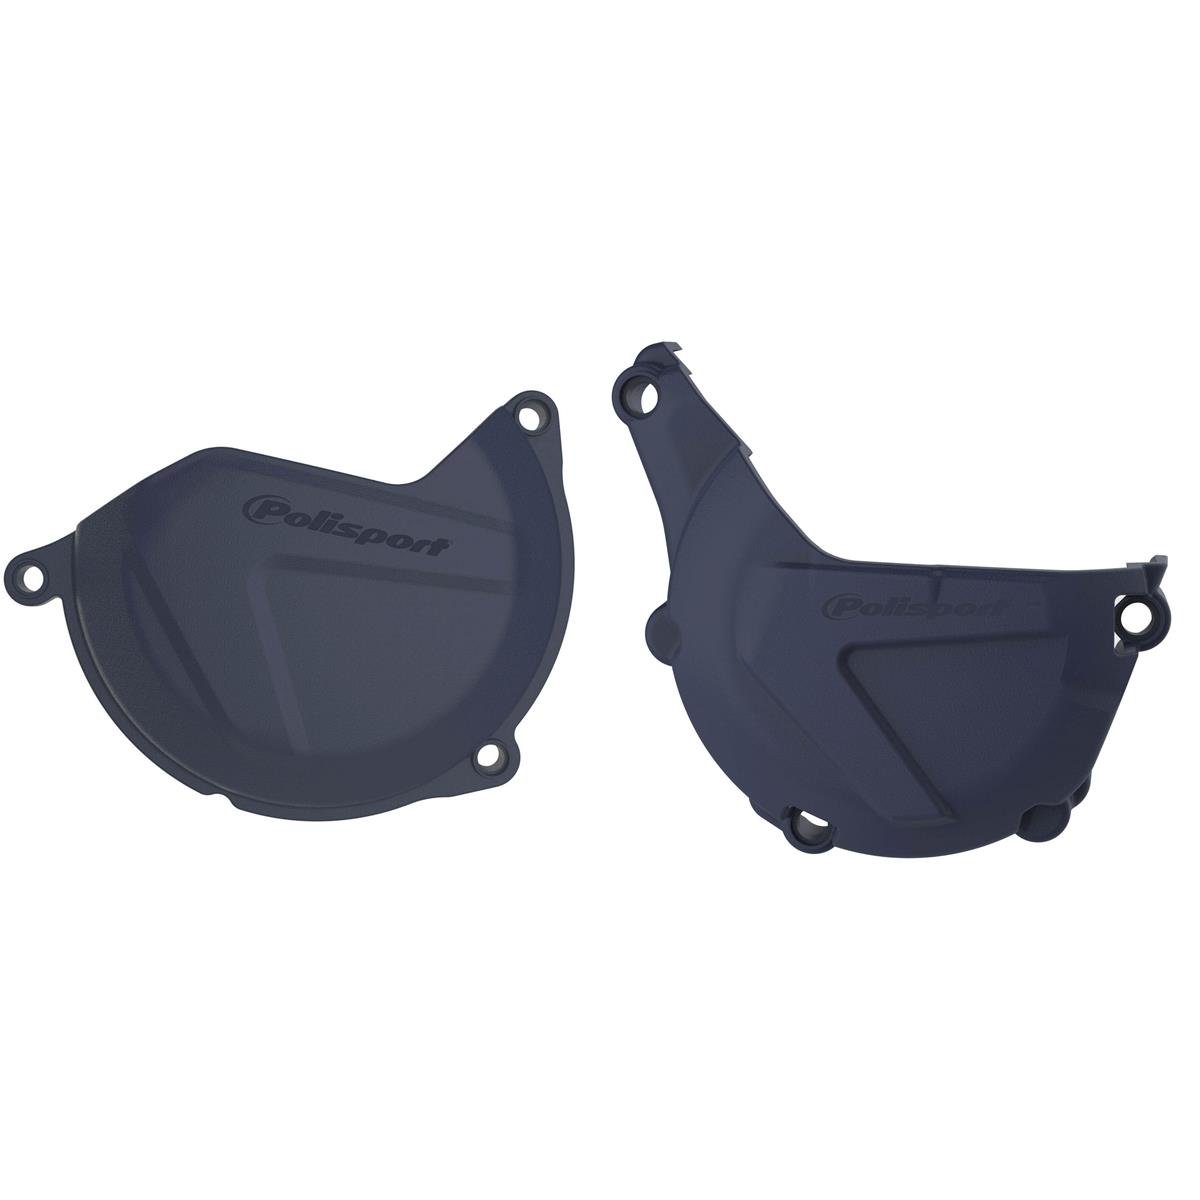 Polisport Clutch/Ignition Cover Protection  Husqvarna FE 450/501 14-16, Blue